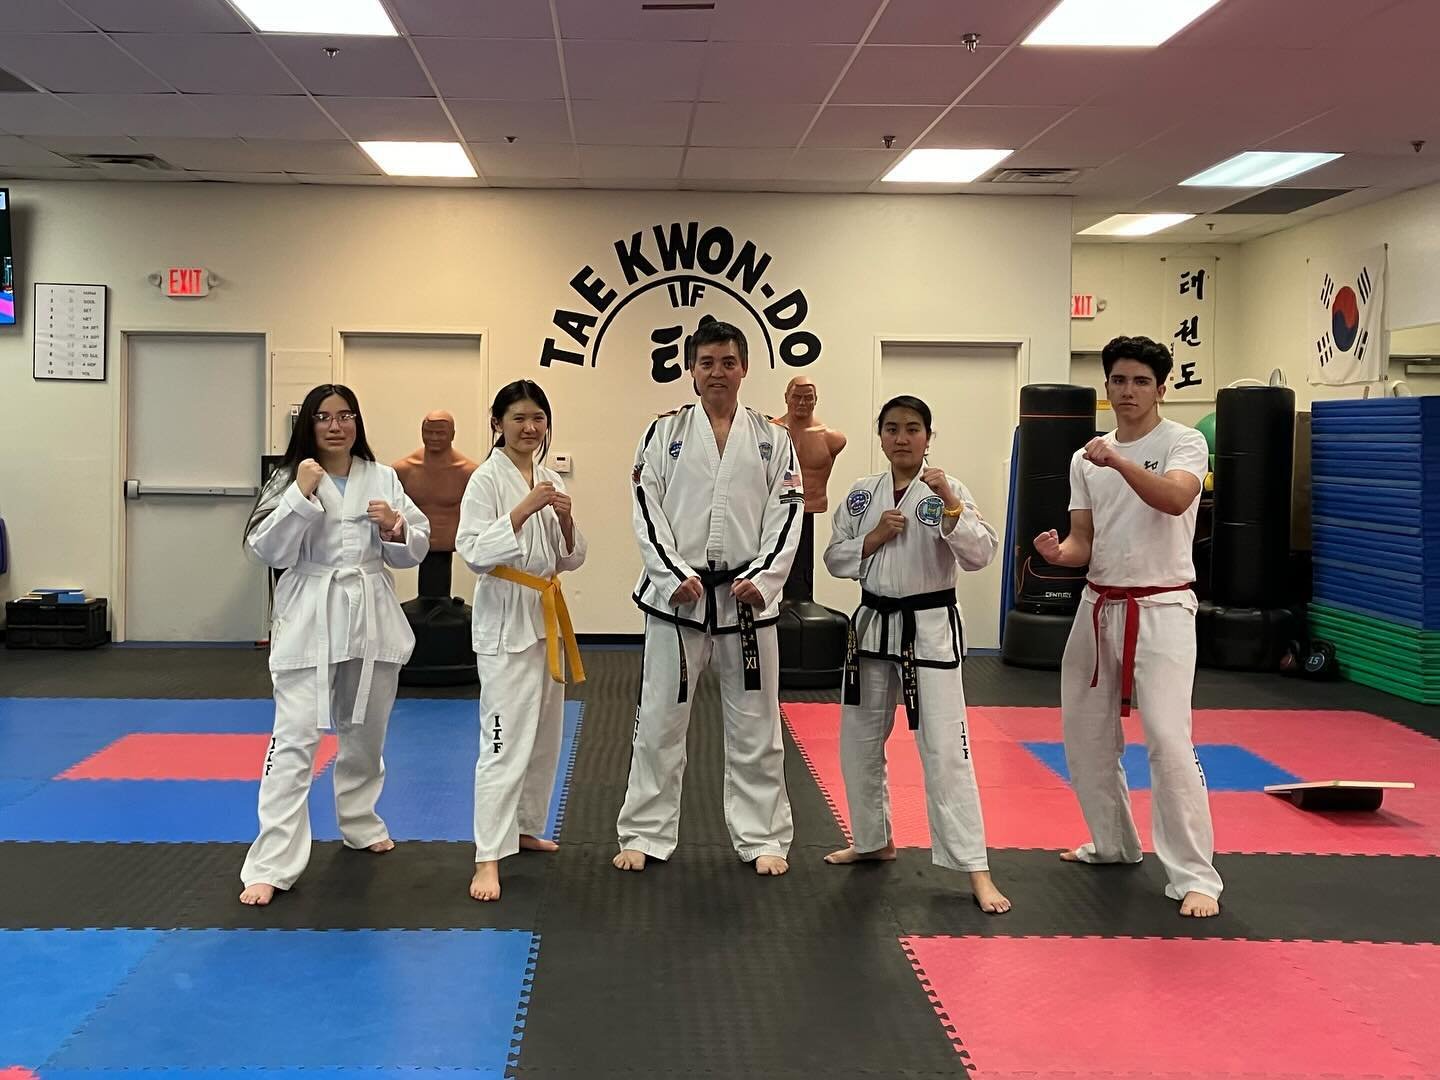 Strike Force Cardio 💪🔥
&bull;
Strike force cardio is a new class we added here at Las Vegas Taekwon-do to help our students increase their cardio and strength. Here are some clips of our students putting work in! Great job this week everyone, Taekw